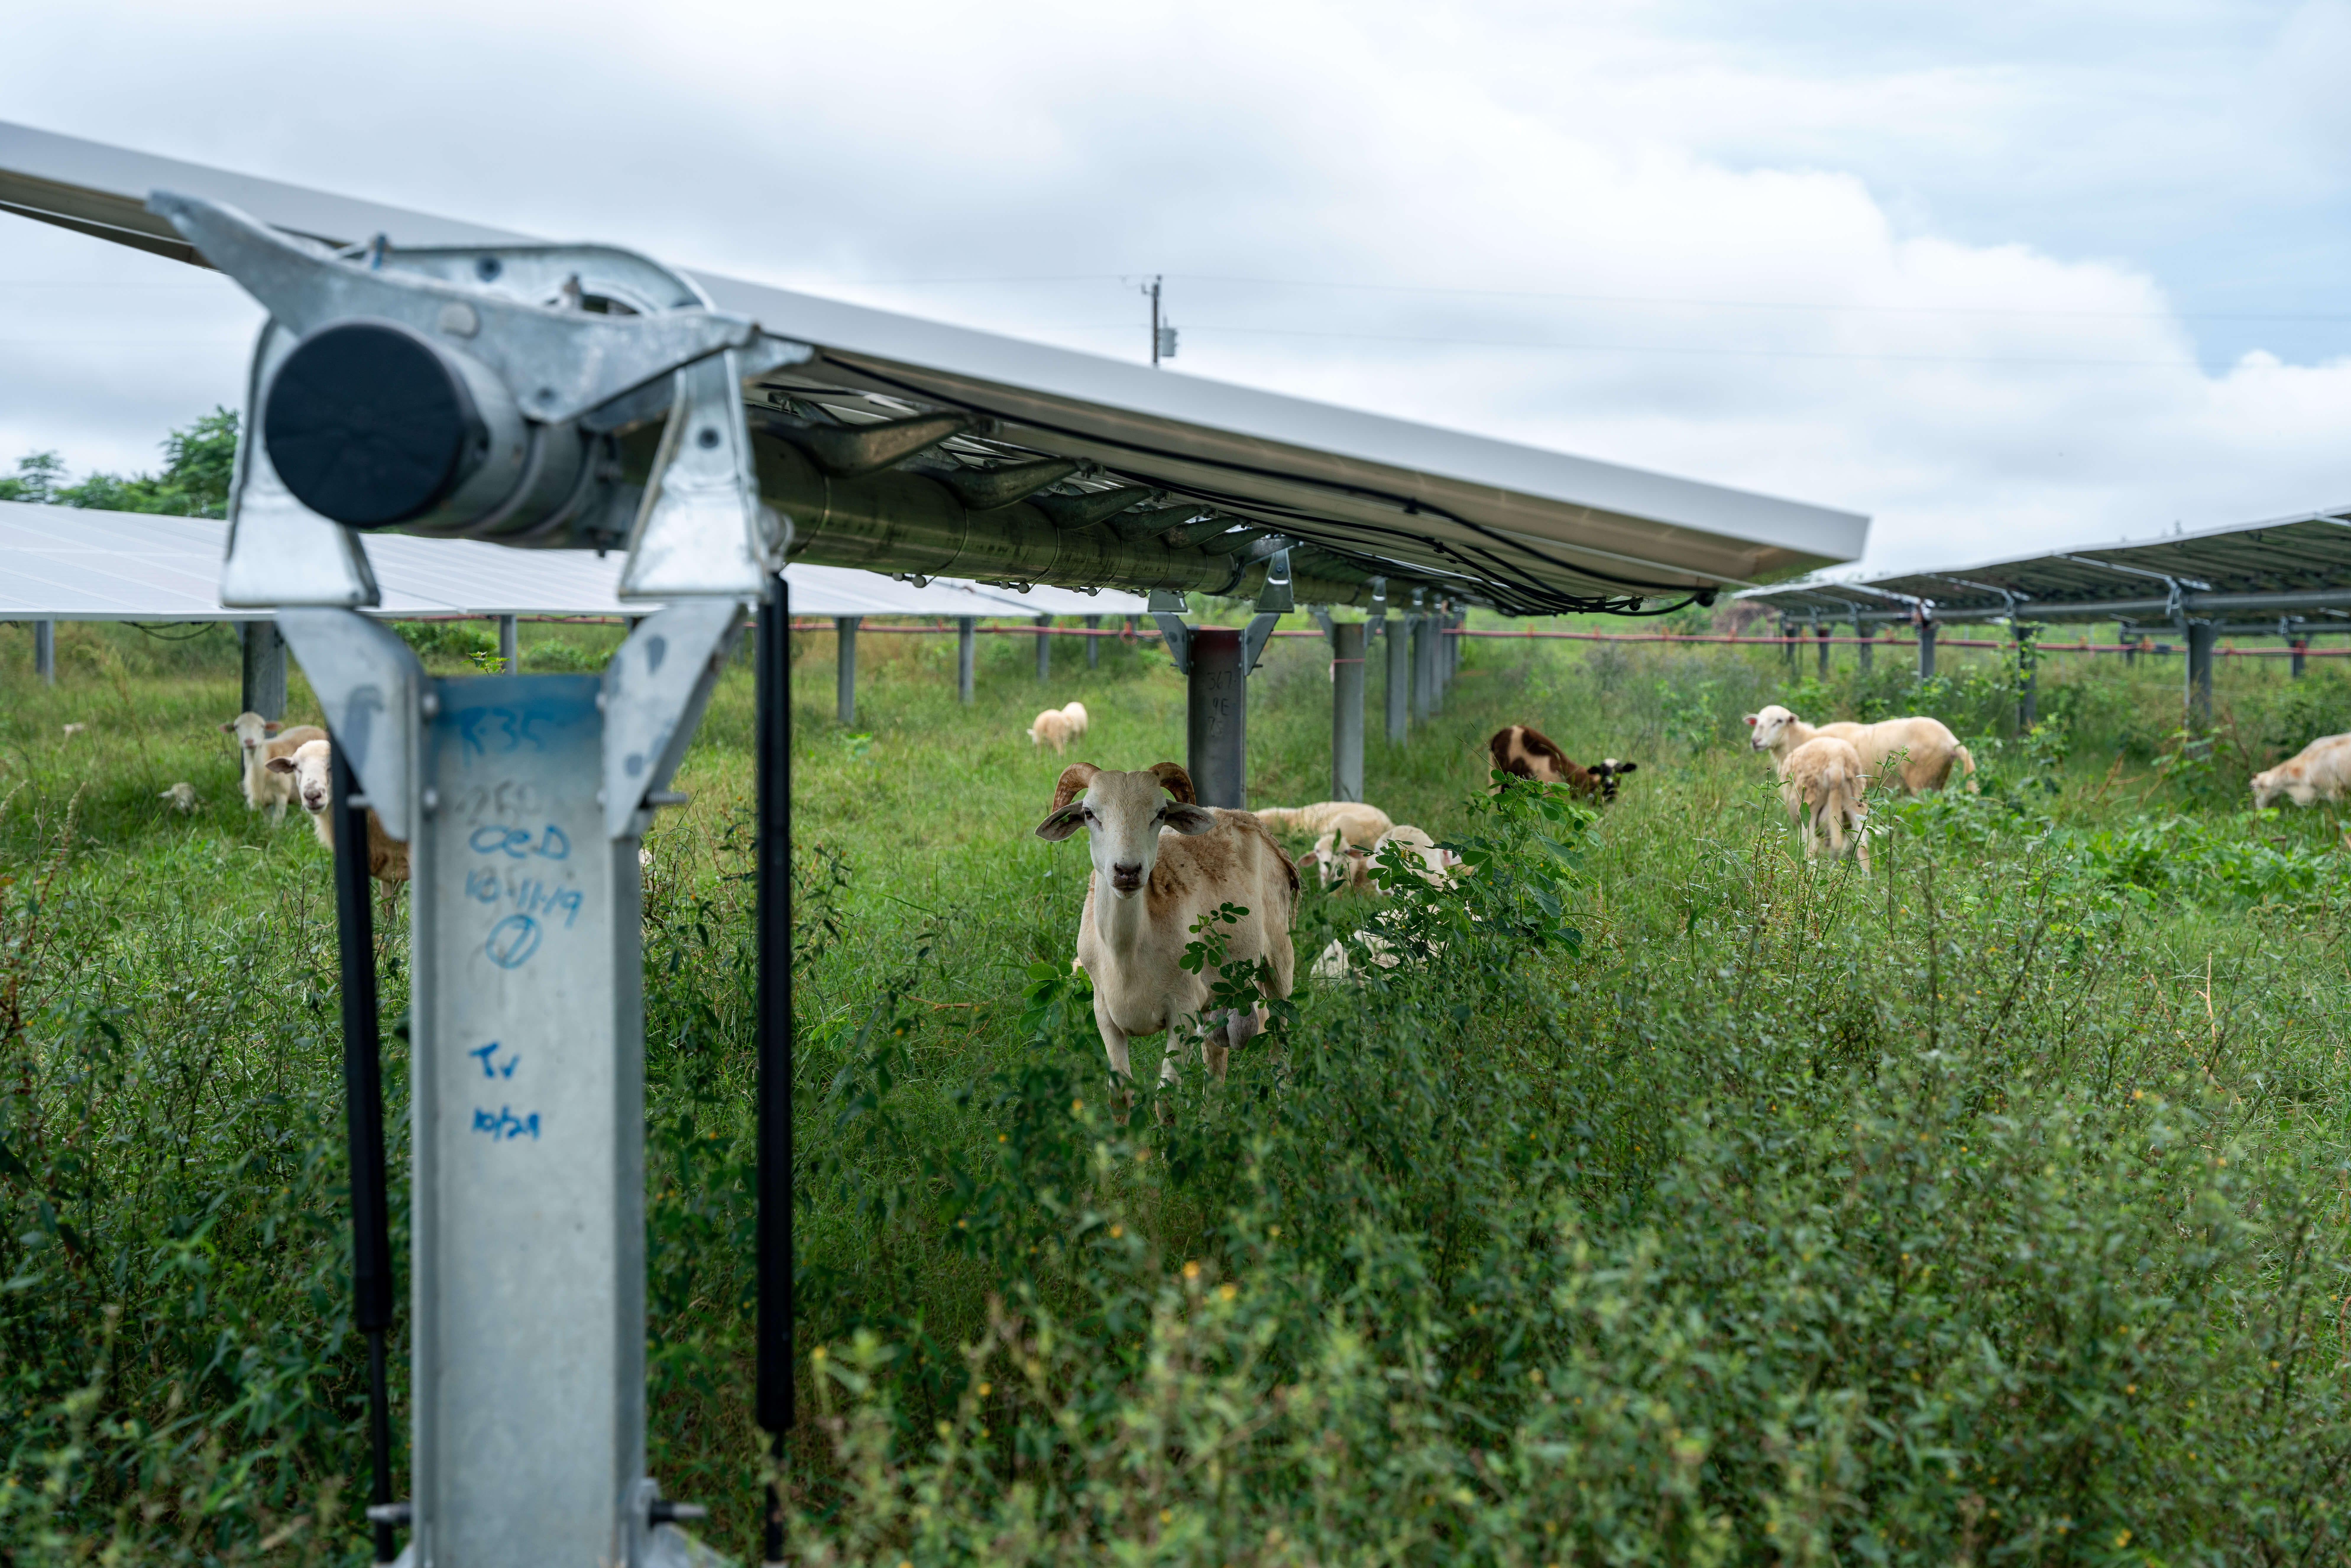 Managed grazing as vegetation control for solar farms